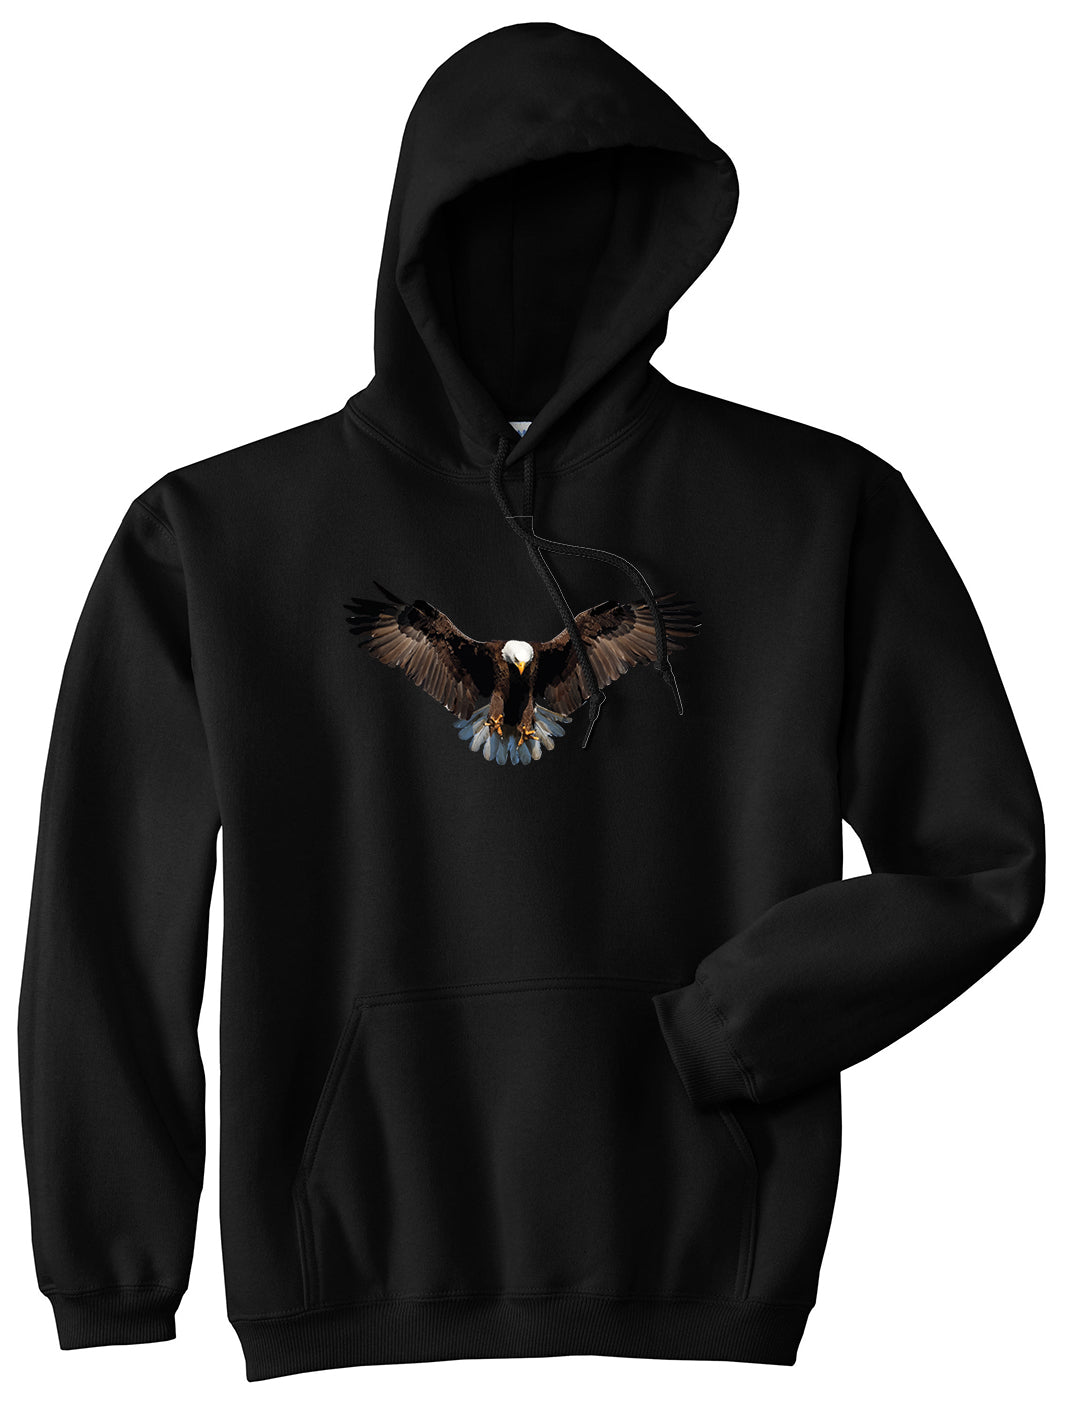 Bald Eagle Wings Spread Black Pullover Hoodie by Kings Of NY